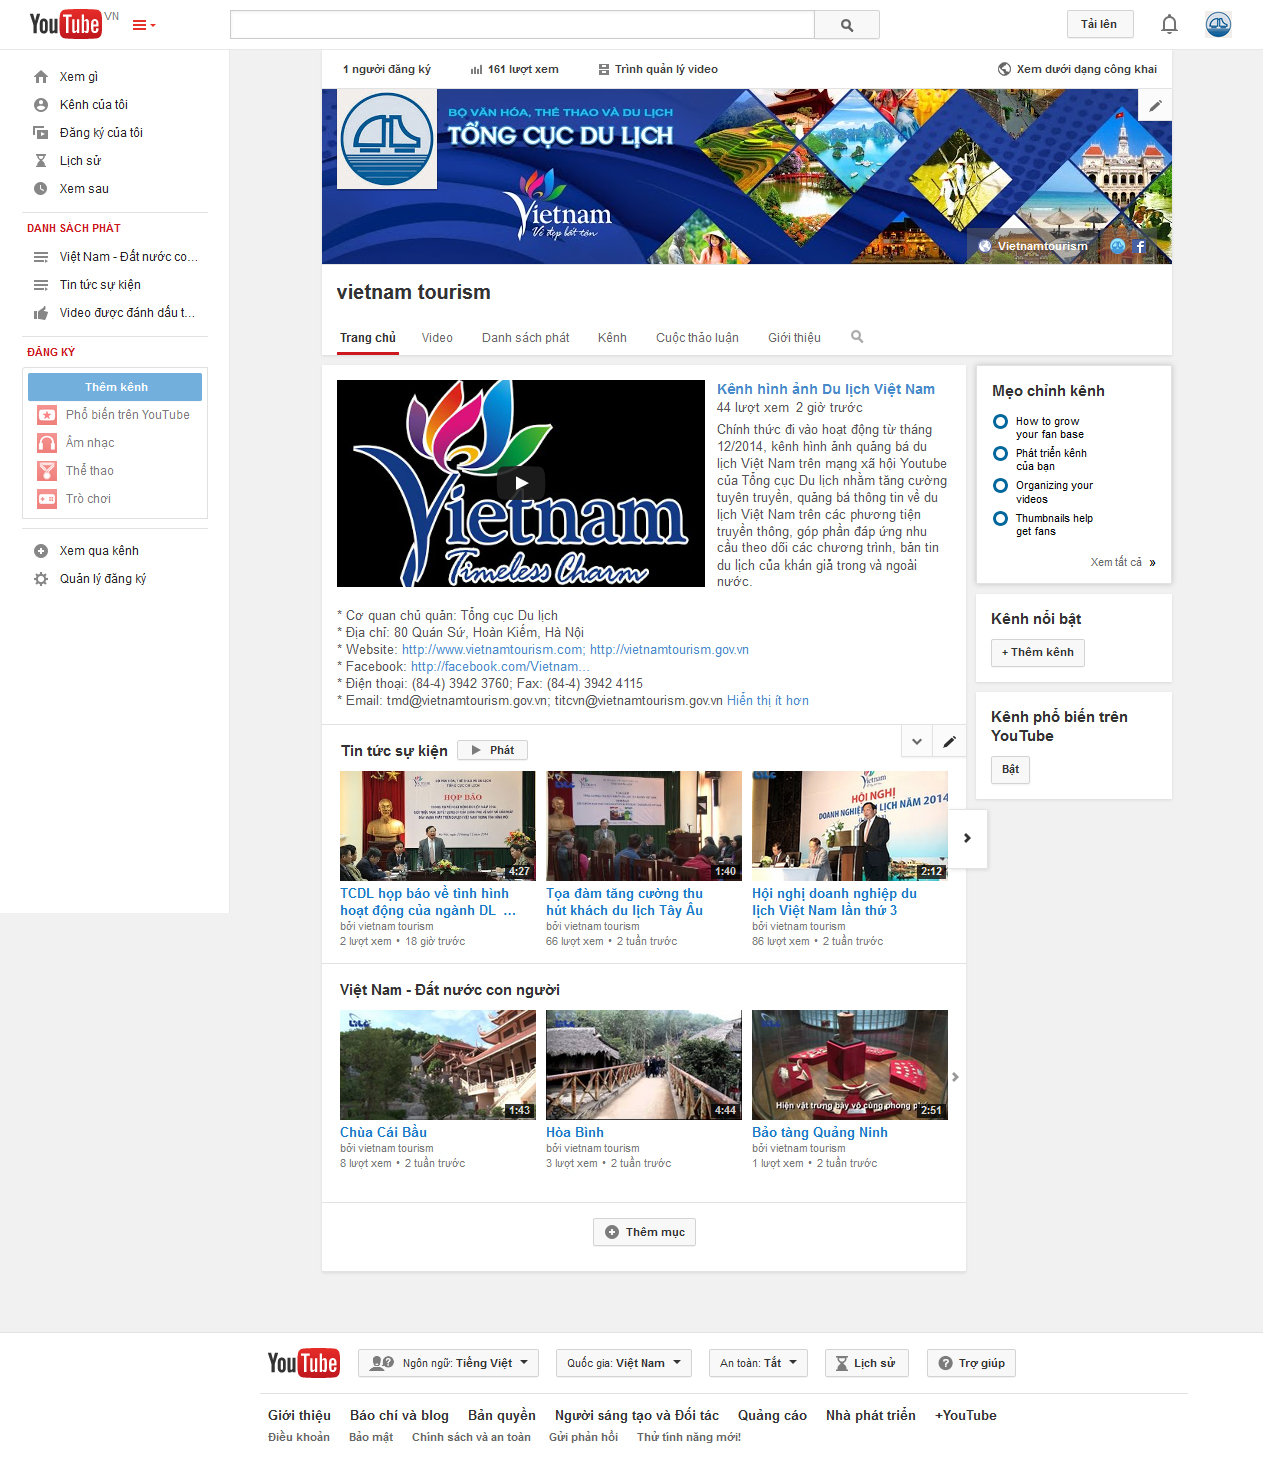 Vietnam tourism administration launches YouTube channel